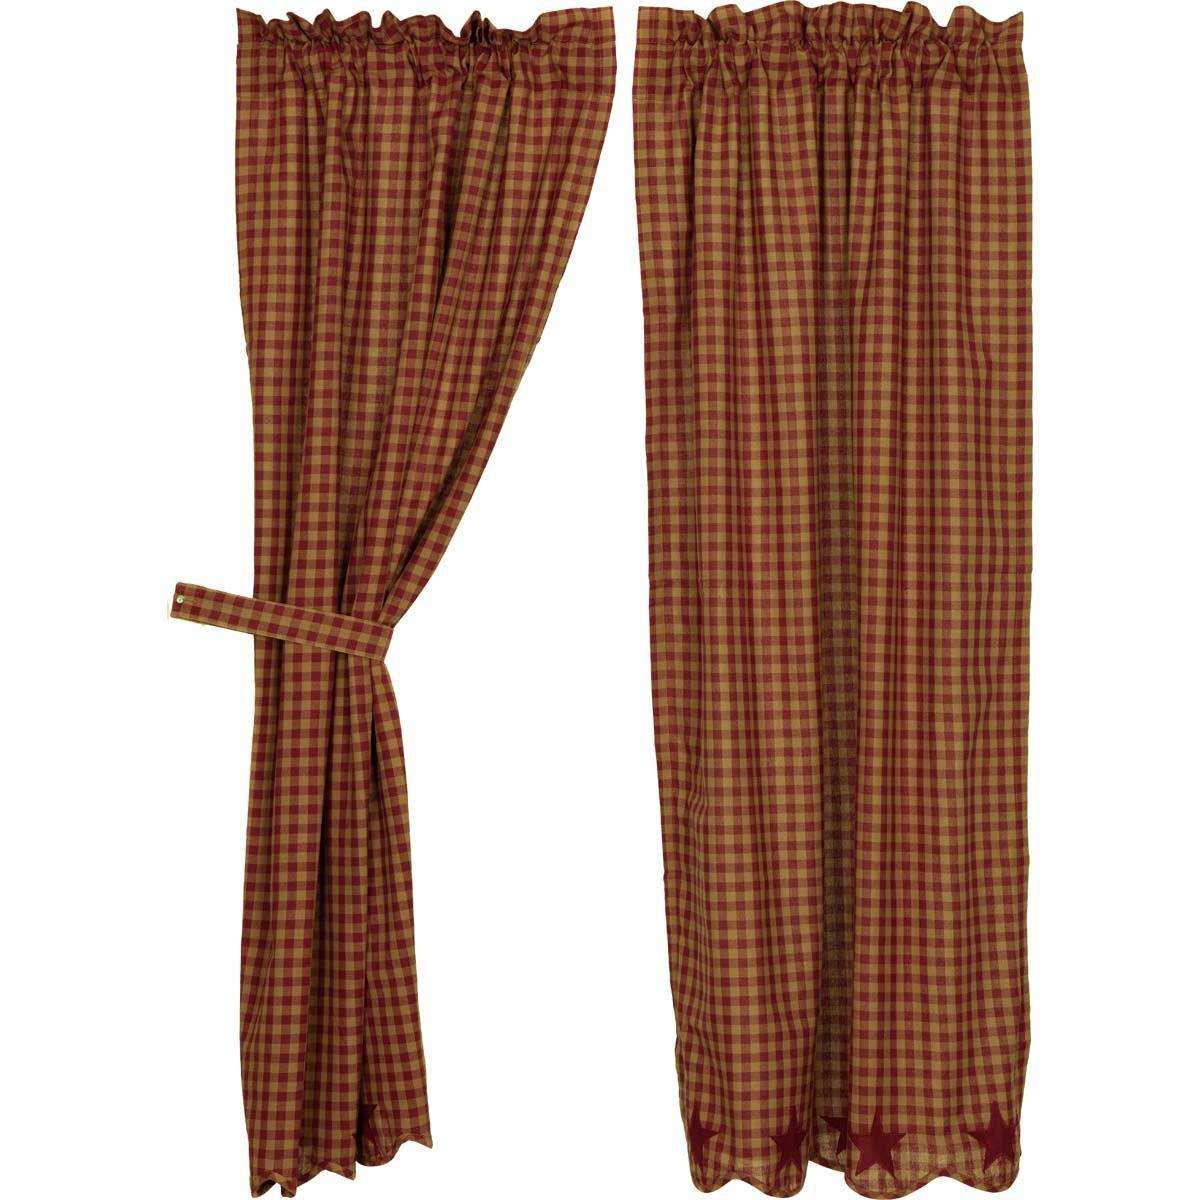 Burgundy Star Scalloped Short Panel Country Curtain Set of 2 36"x63" - The Fox Decor